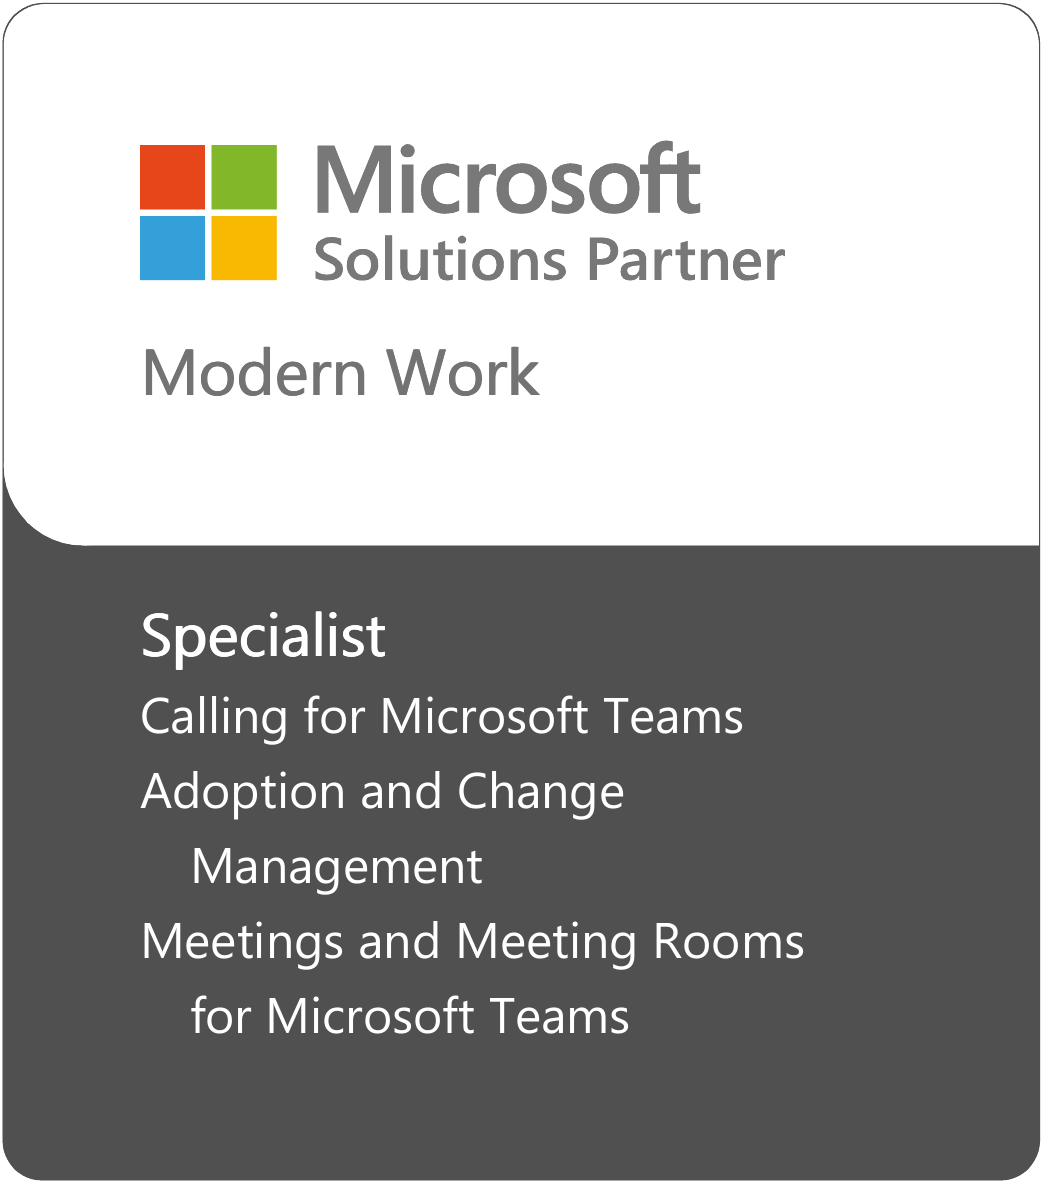 Microsoft Solutions Partner: Modern Work. Specialist: Calling for Microsoft Teams, Adoption and Change Management, Meetings and Meeting Rooms for Microsoft Teams